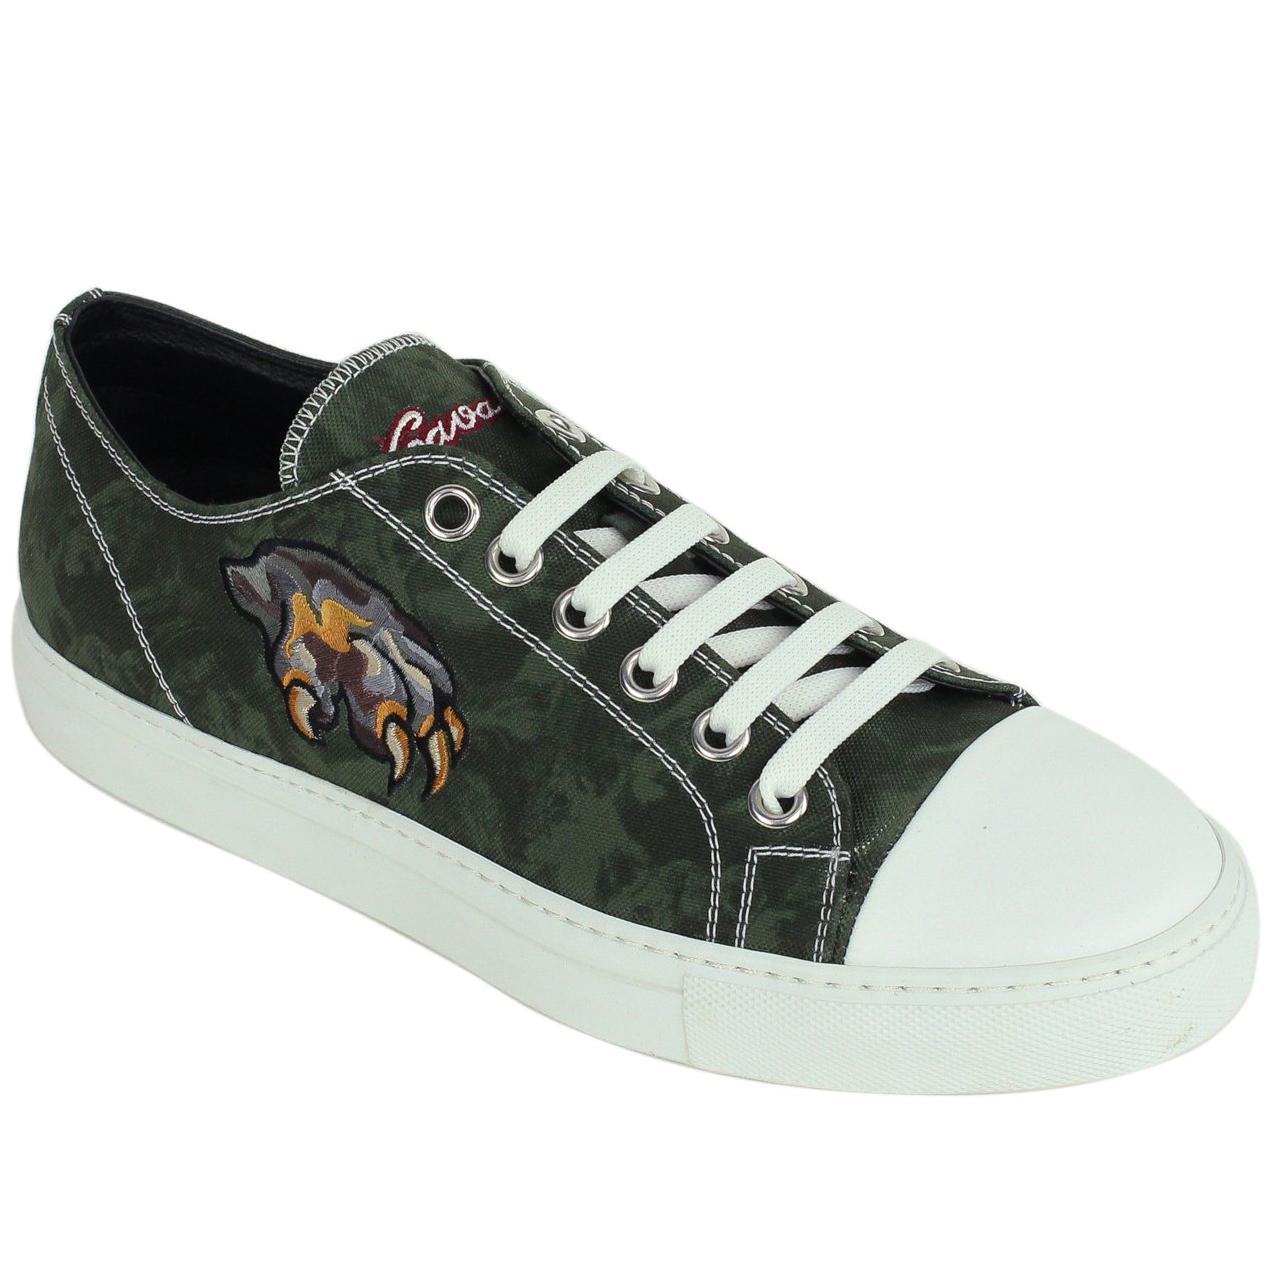 Roberto Cavalli Mens Green Embroidered Claw Low Top Sneaker For Sale